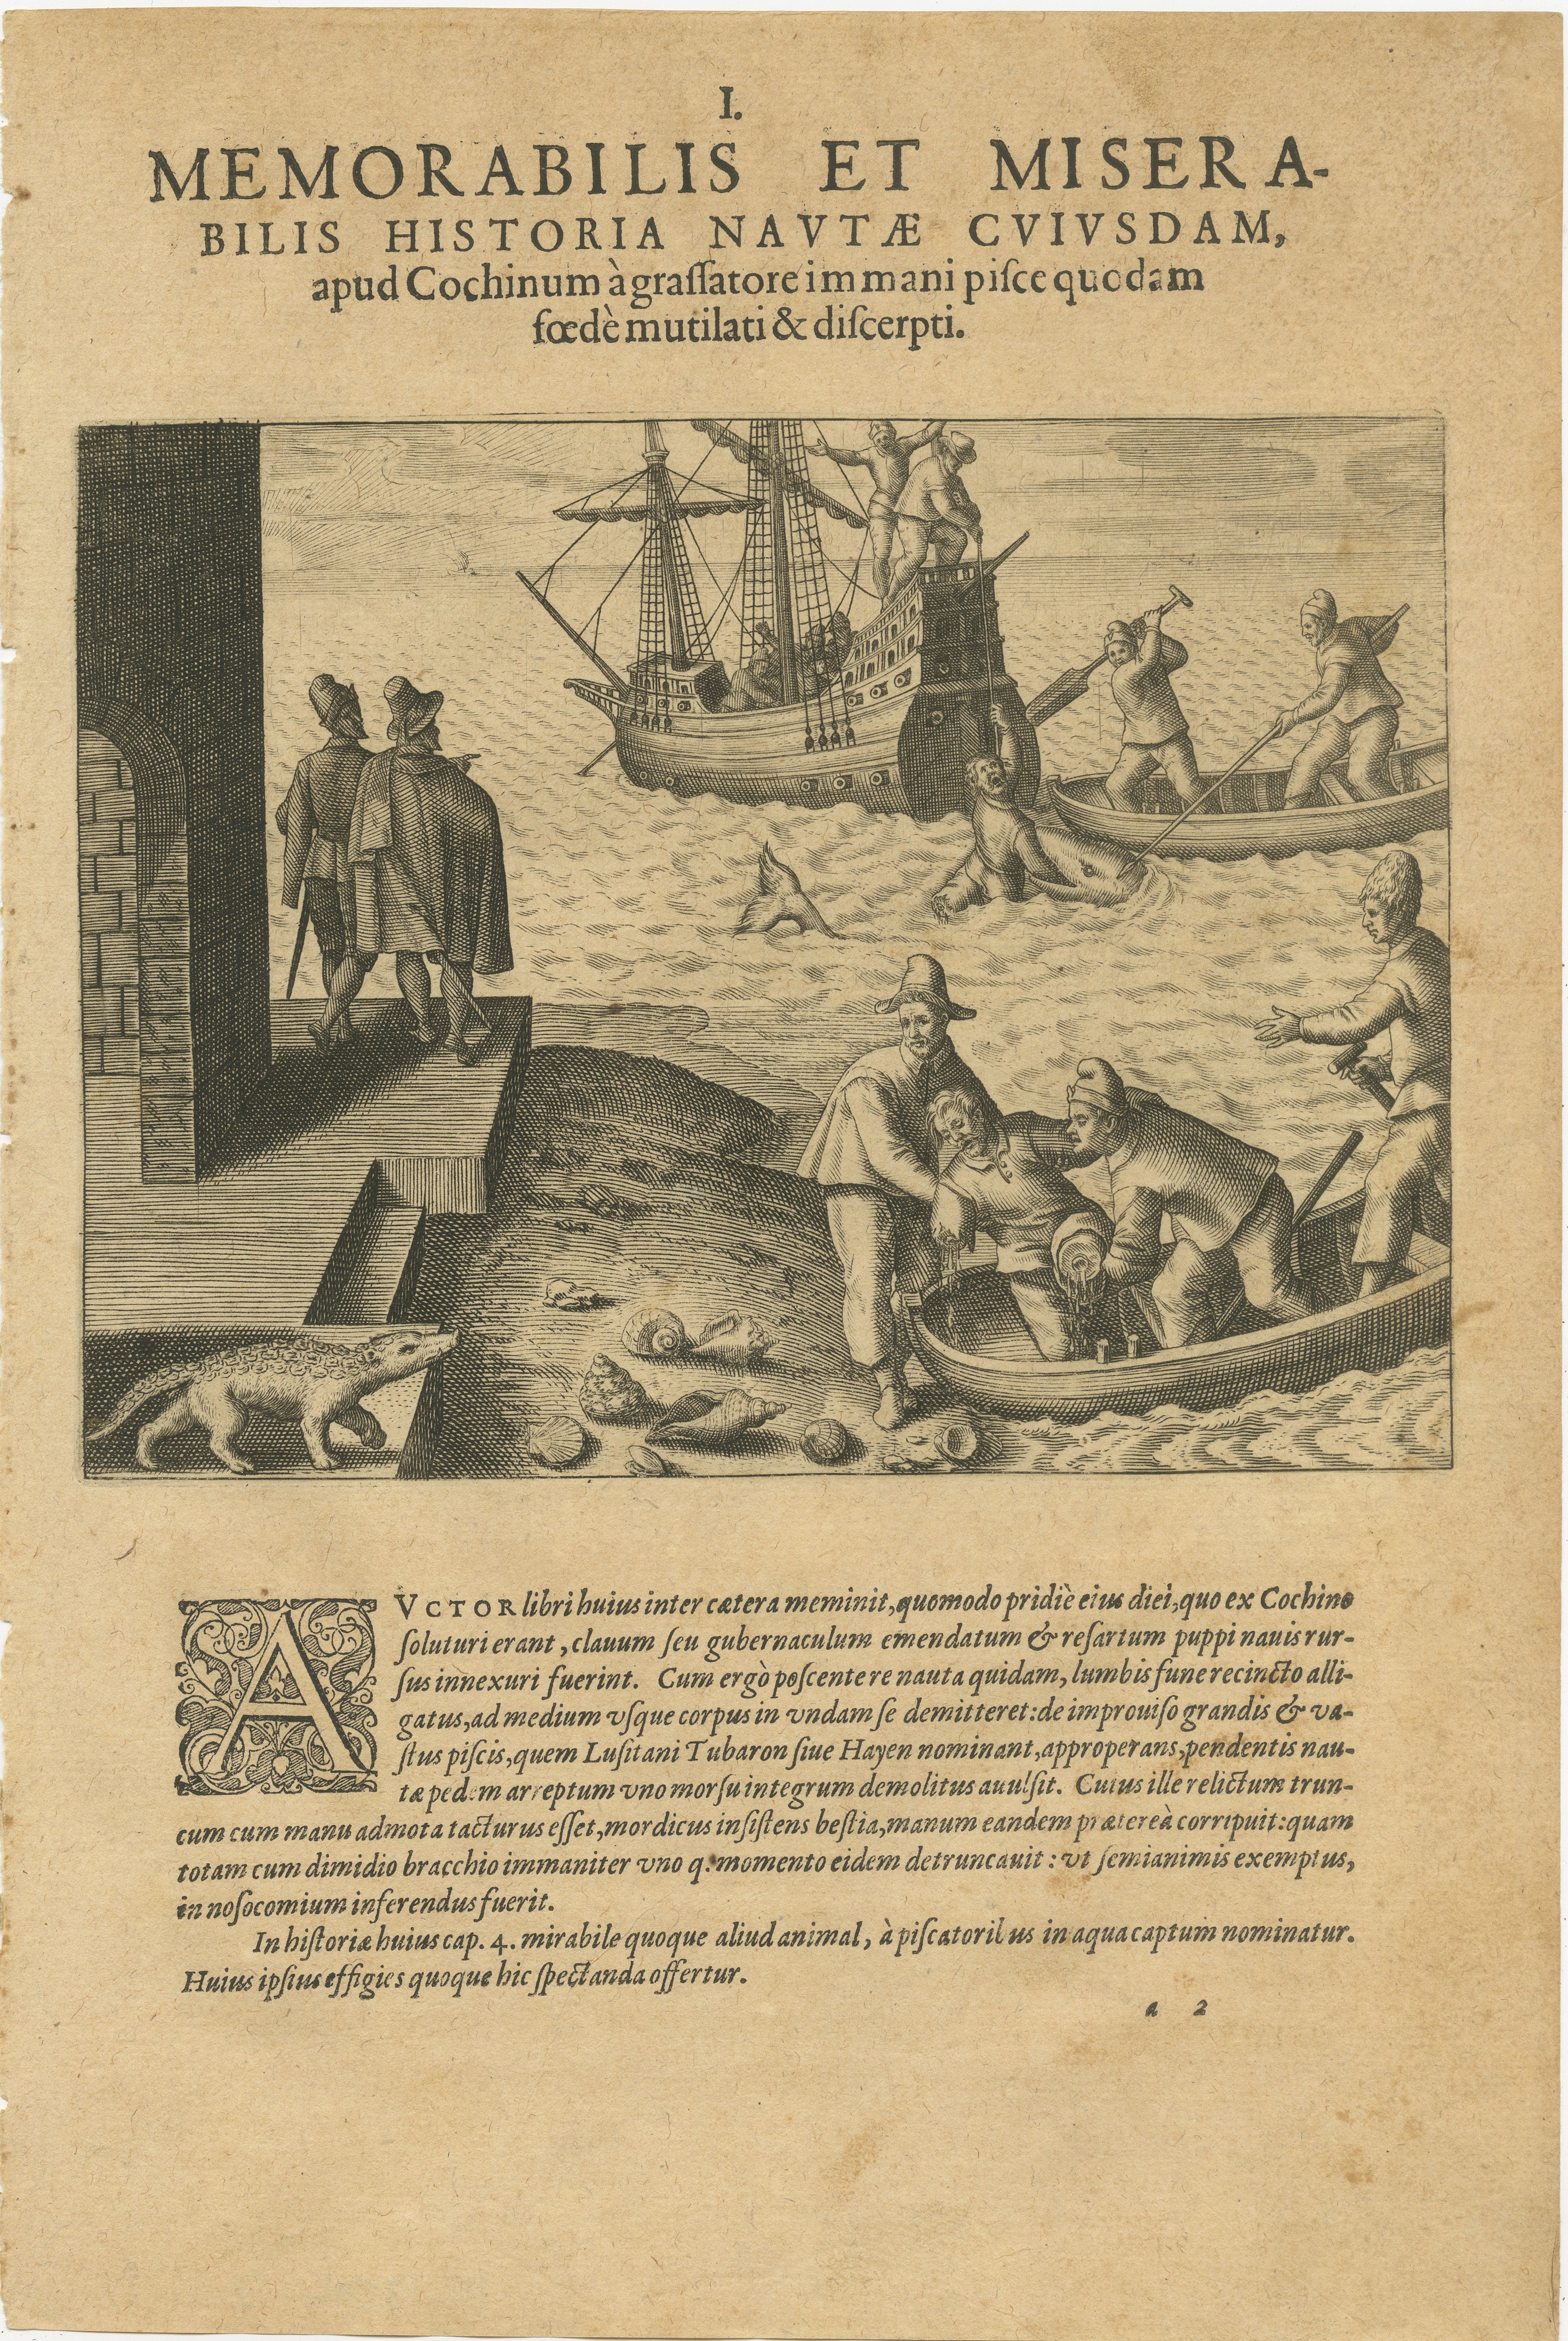 Engraving by Theodore De Bry from 'Pars Quarta Indiae Orientalis...,' 1601,  with descriptive latin text below the image.

Colossal Crustaceans: The de Bry Engraving of Nautical Battles with Giant Crabs.

Unleash the power of history and exploration